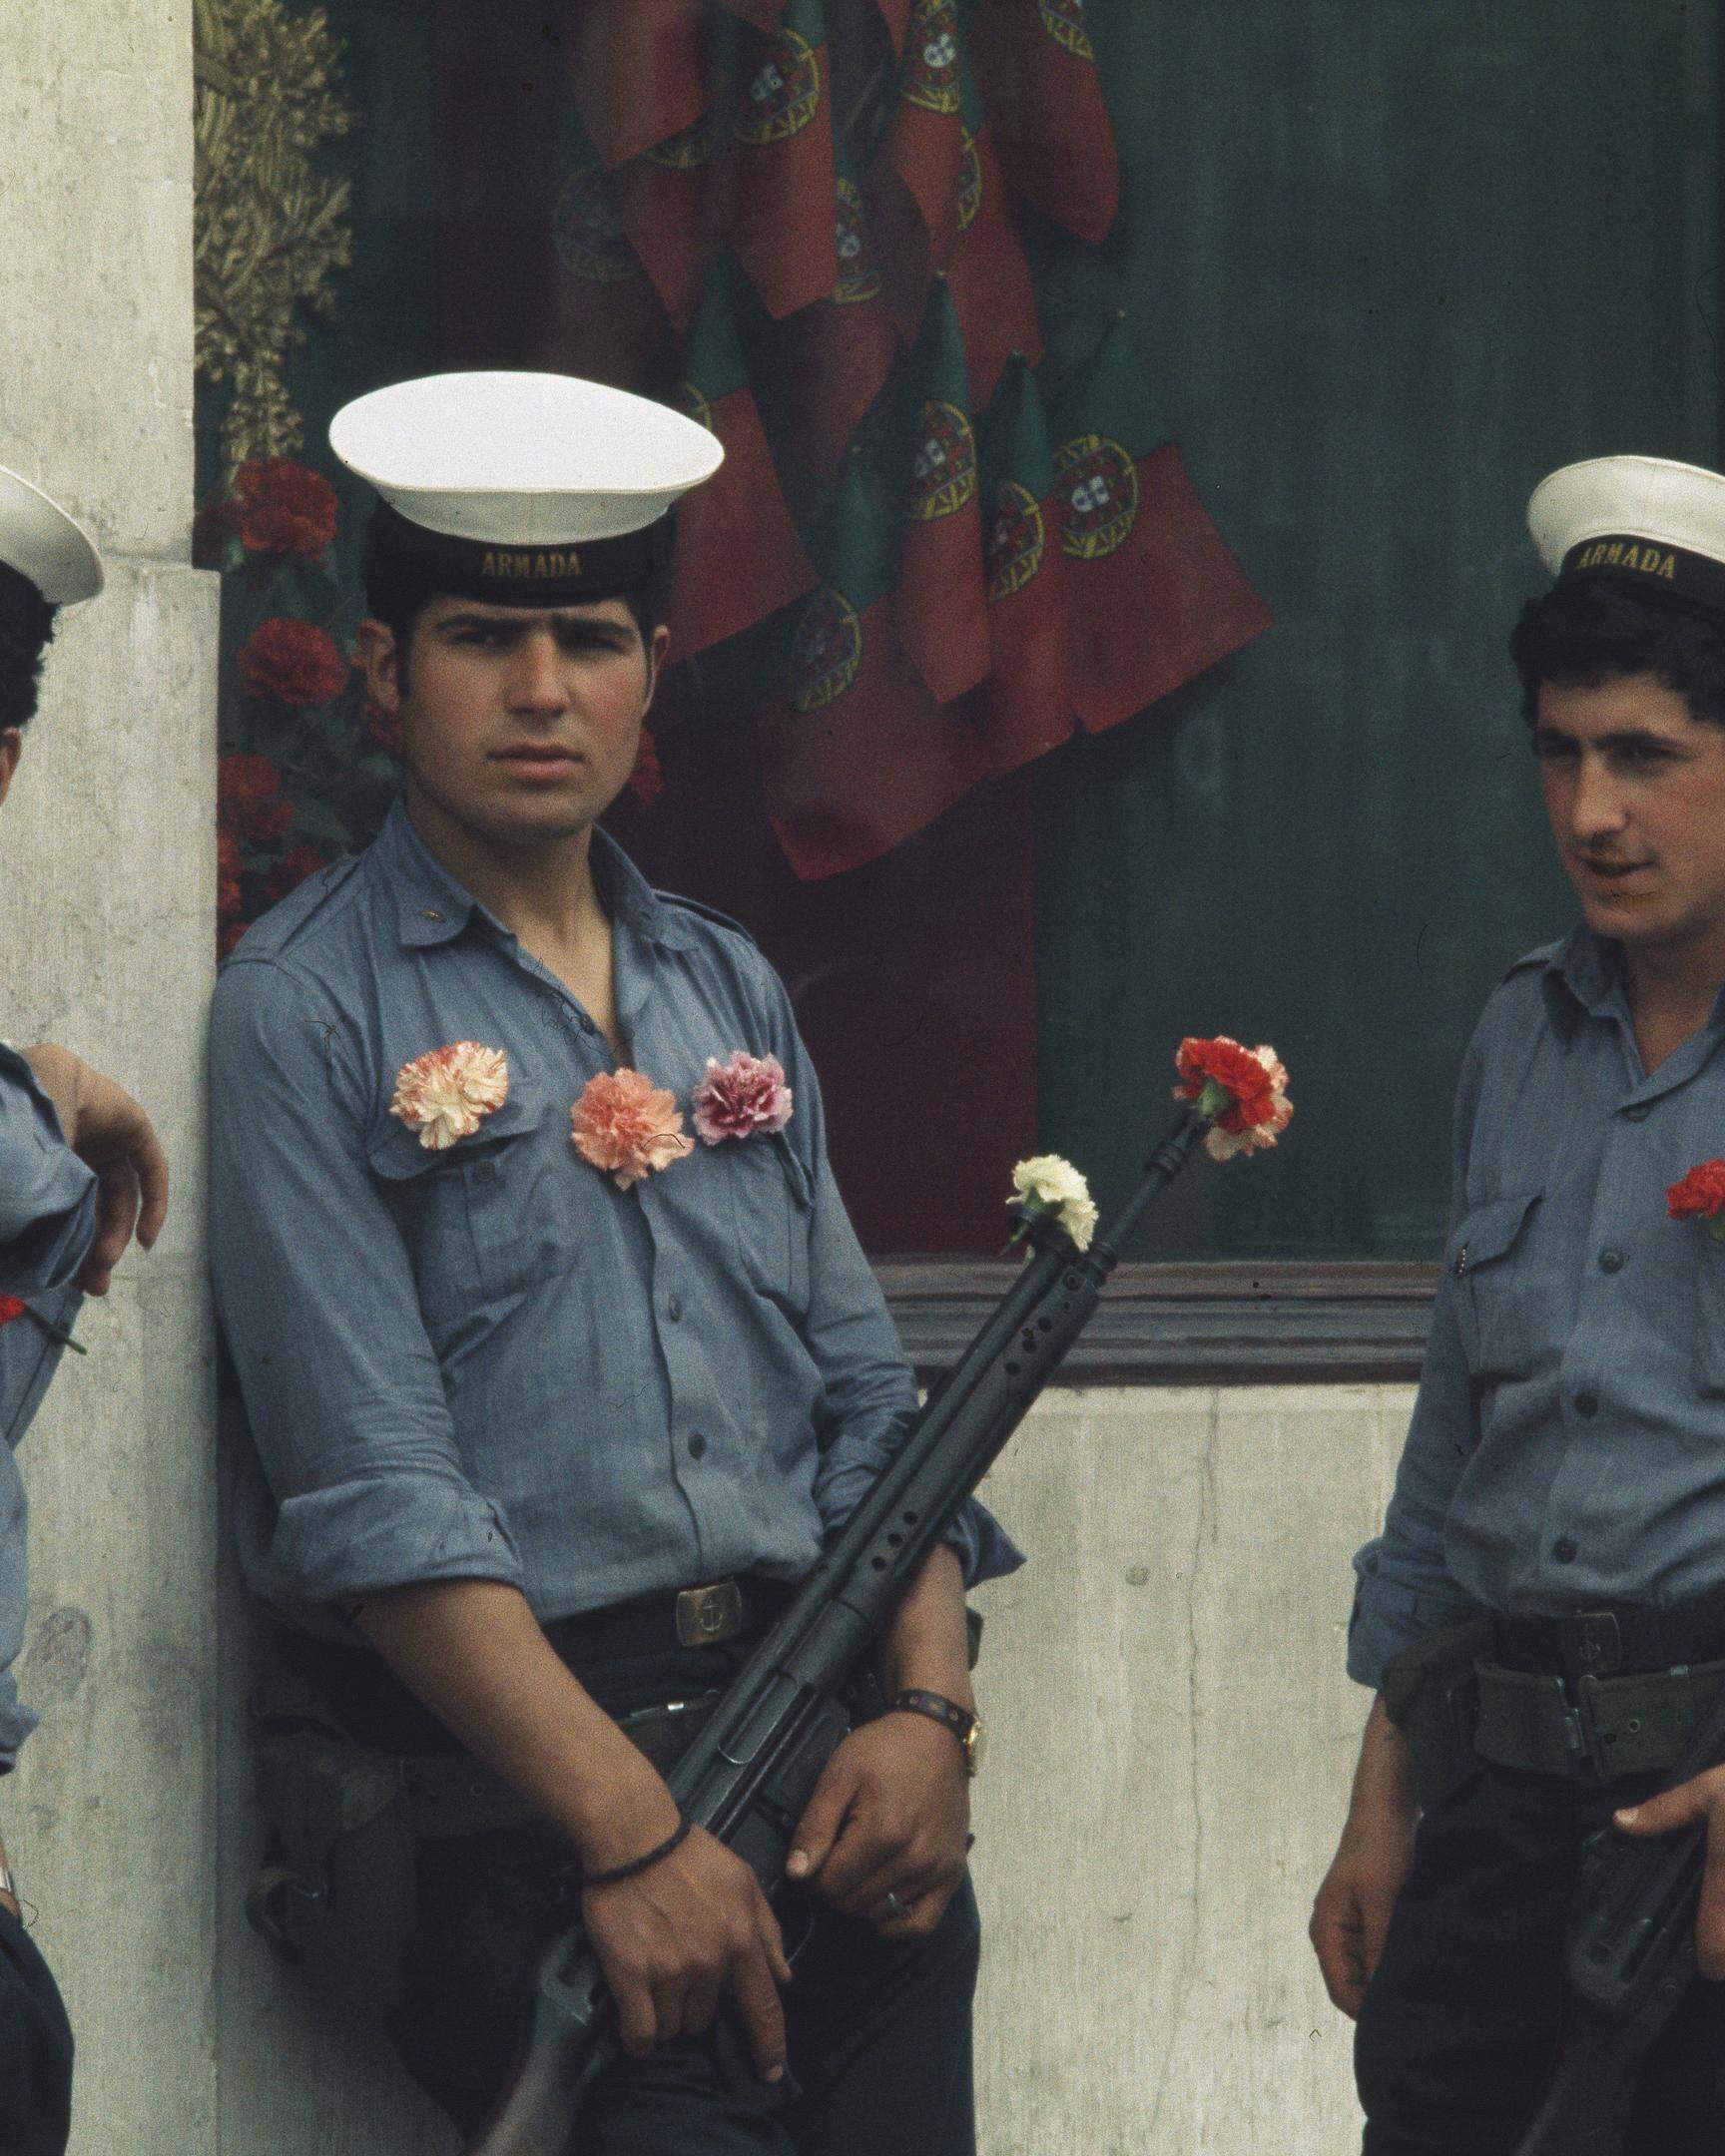 Portuguese soldiers with carnations on their uniforms and in their gun barrels stand guard in Lisbon on April 29th, 1974. The carnation is a symbol of the 'Carnation Revolution' military coup that ended nearly 50 years of dictatorship in Portugal. (Photo by UPI/Bettmann Archive/Getty Images)